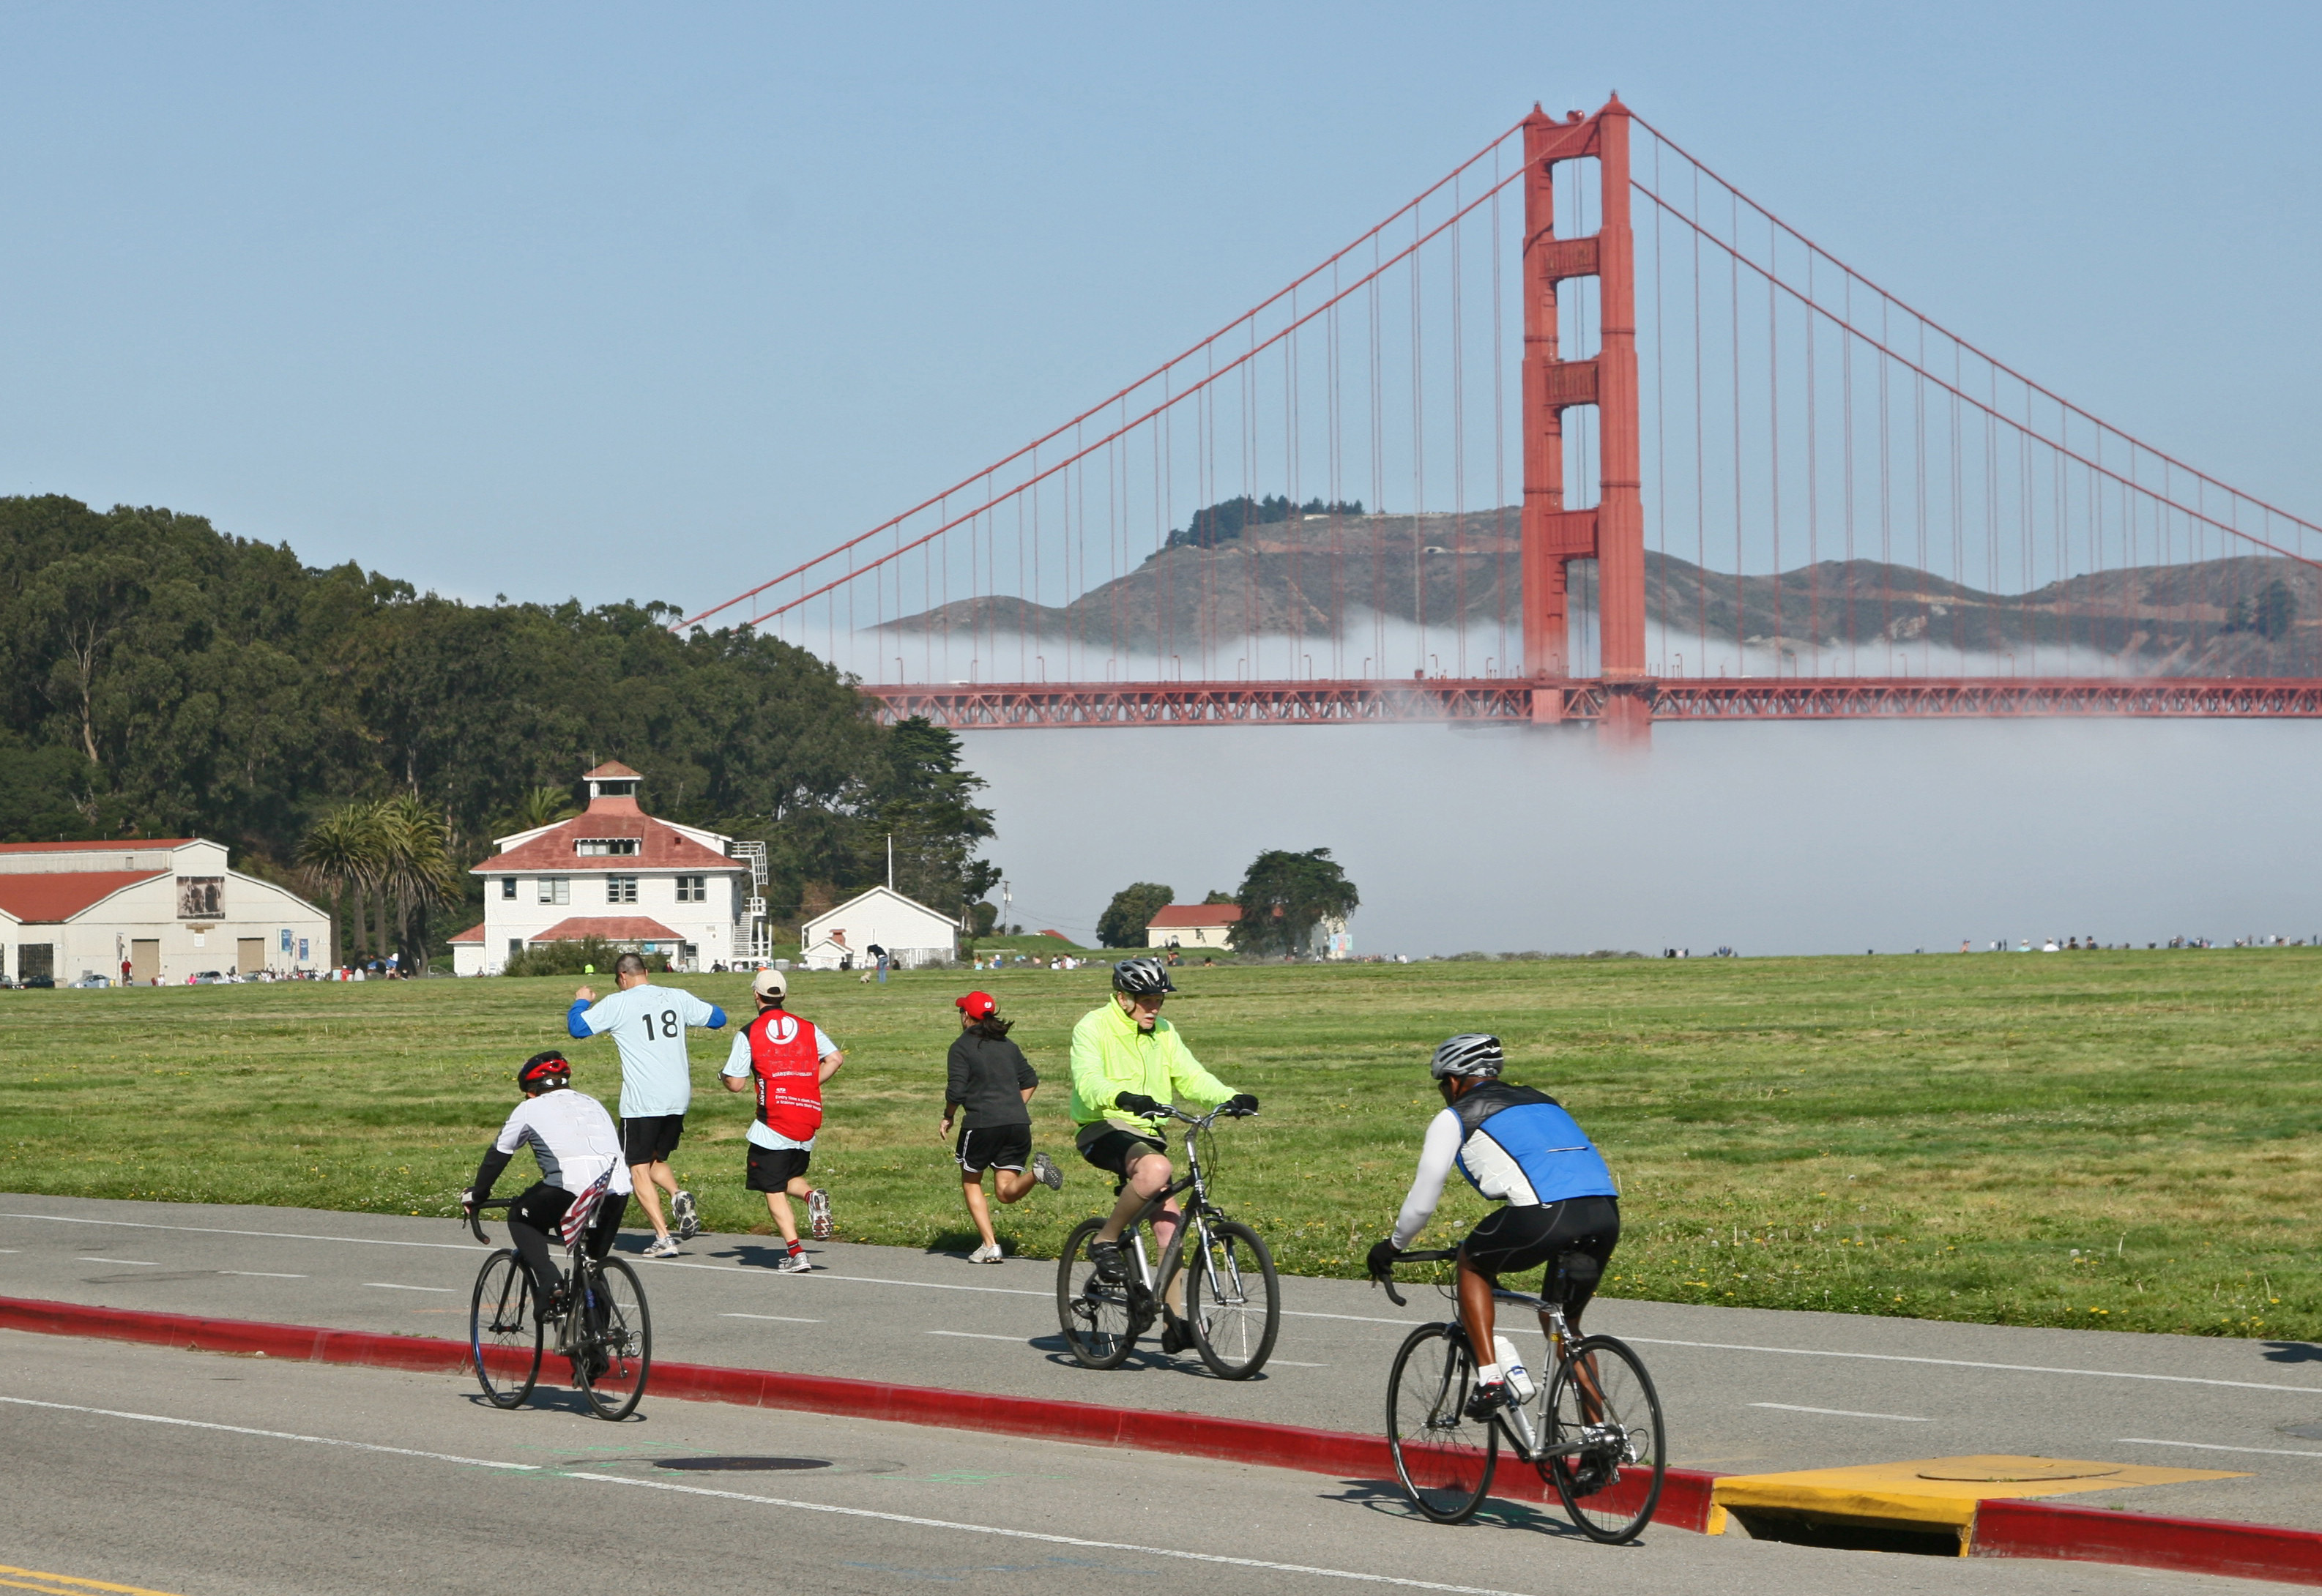 Runners and bicyclists on a trail near the Golden Gate Bridge